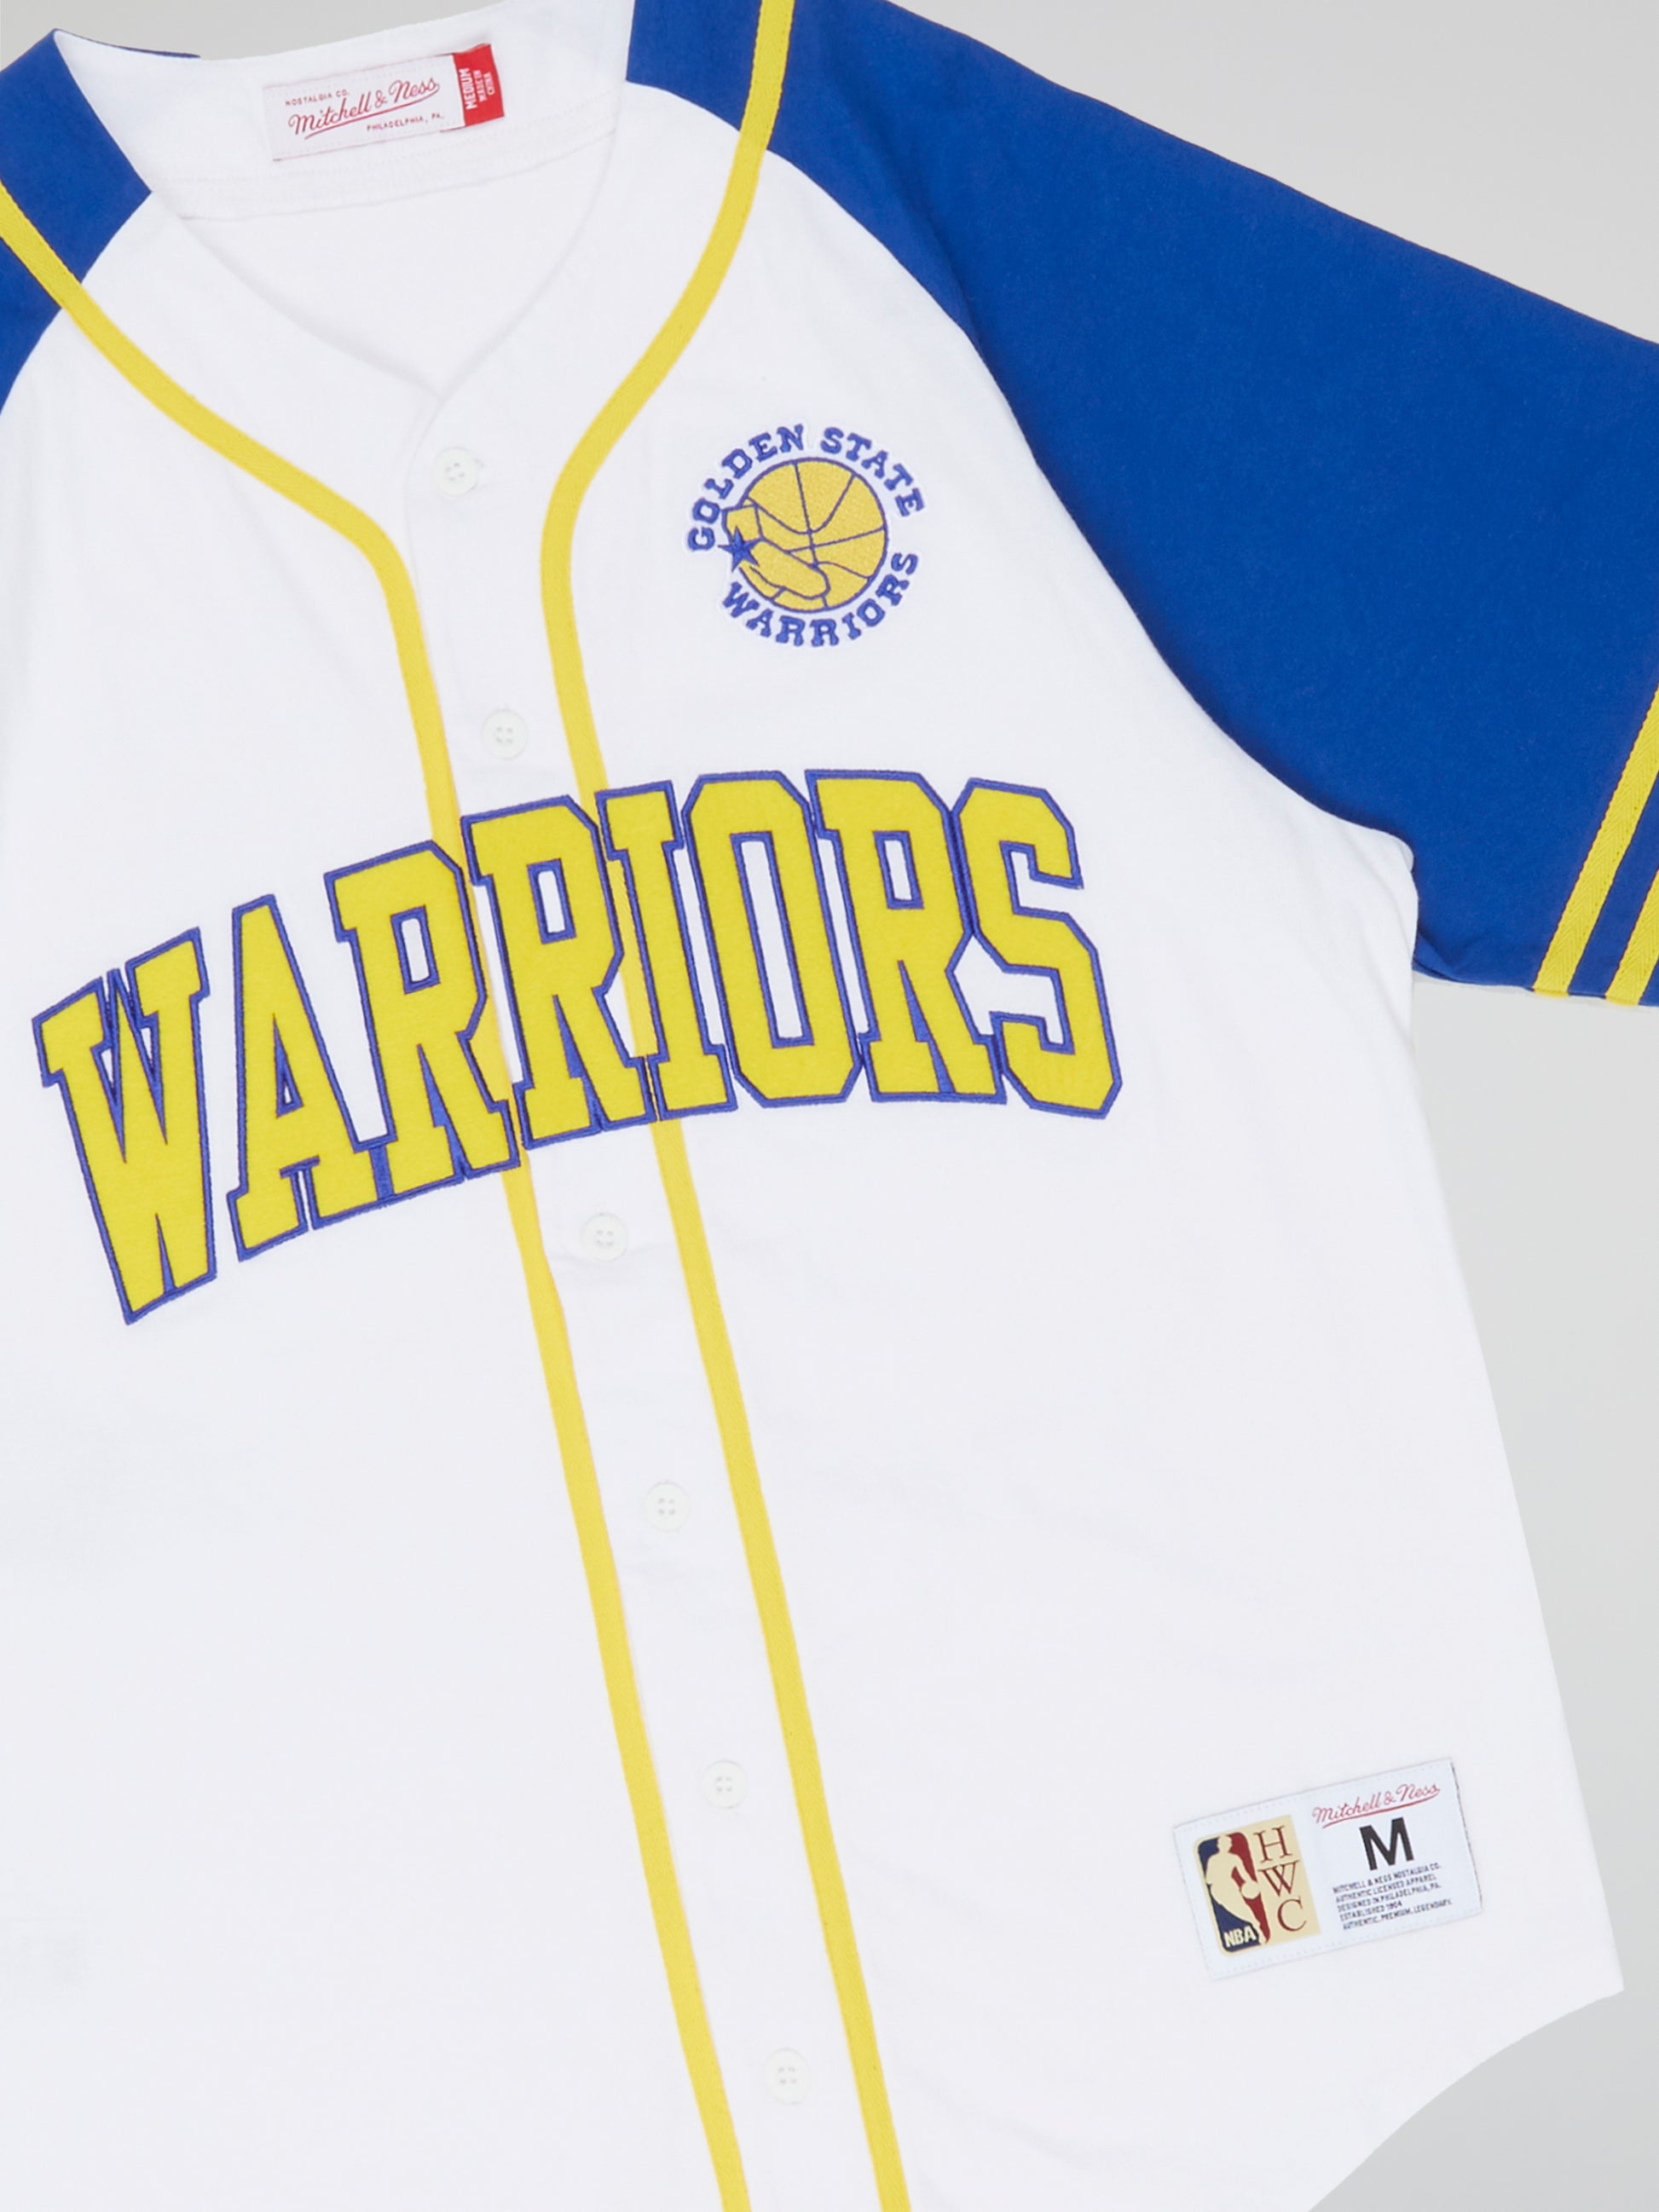 Mitchell&Ness - Practice Day Buttom Front Jersey Golden State Warriors